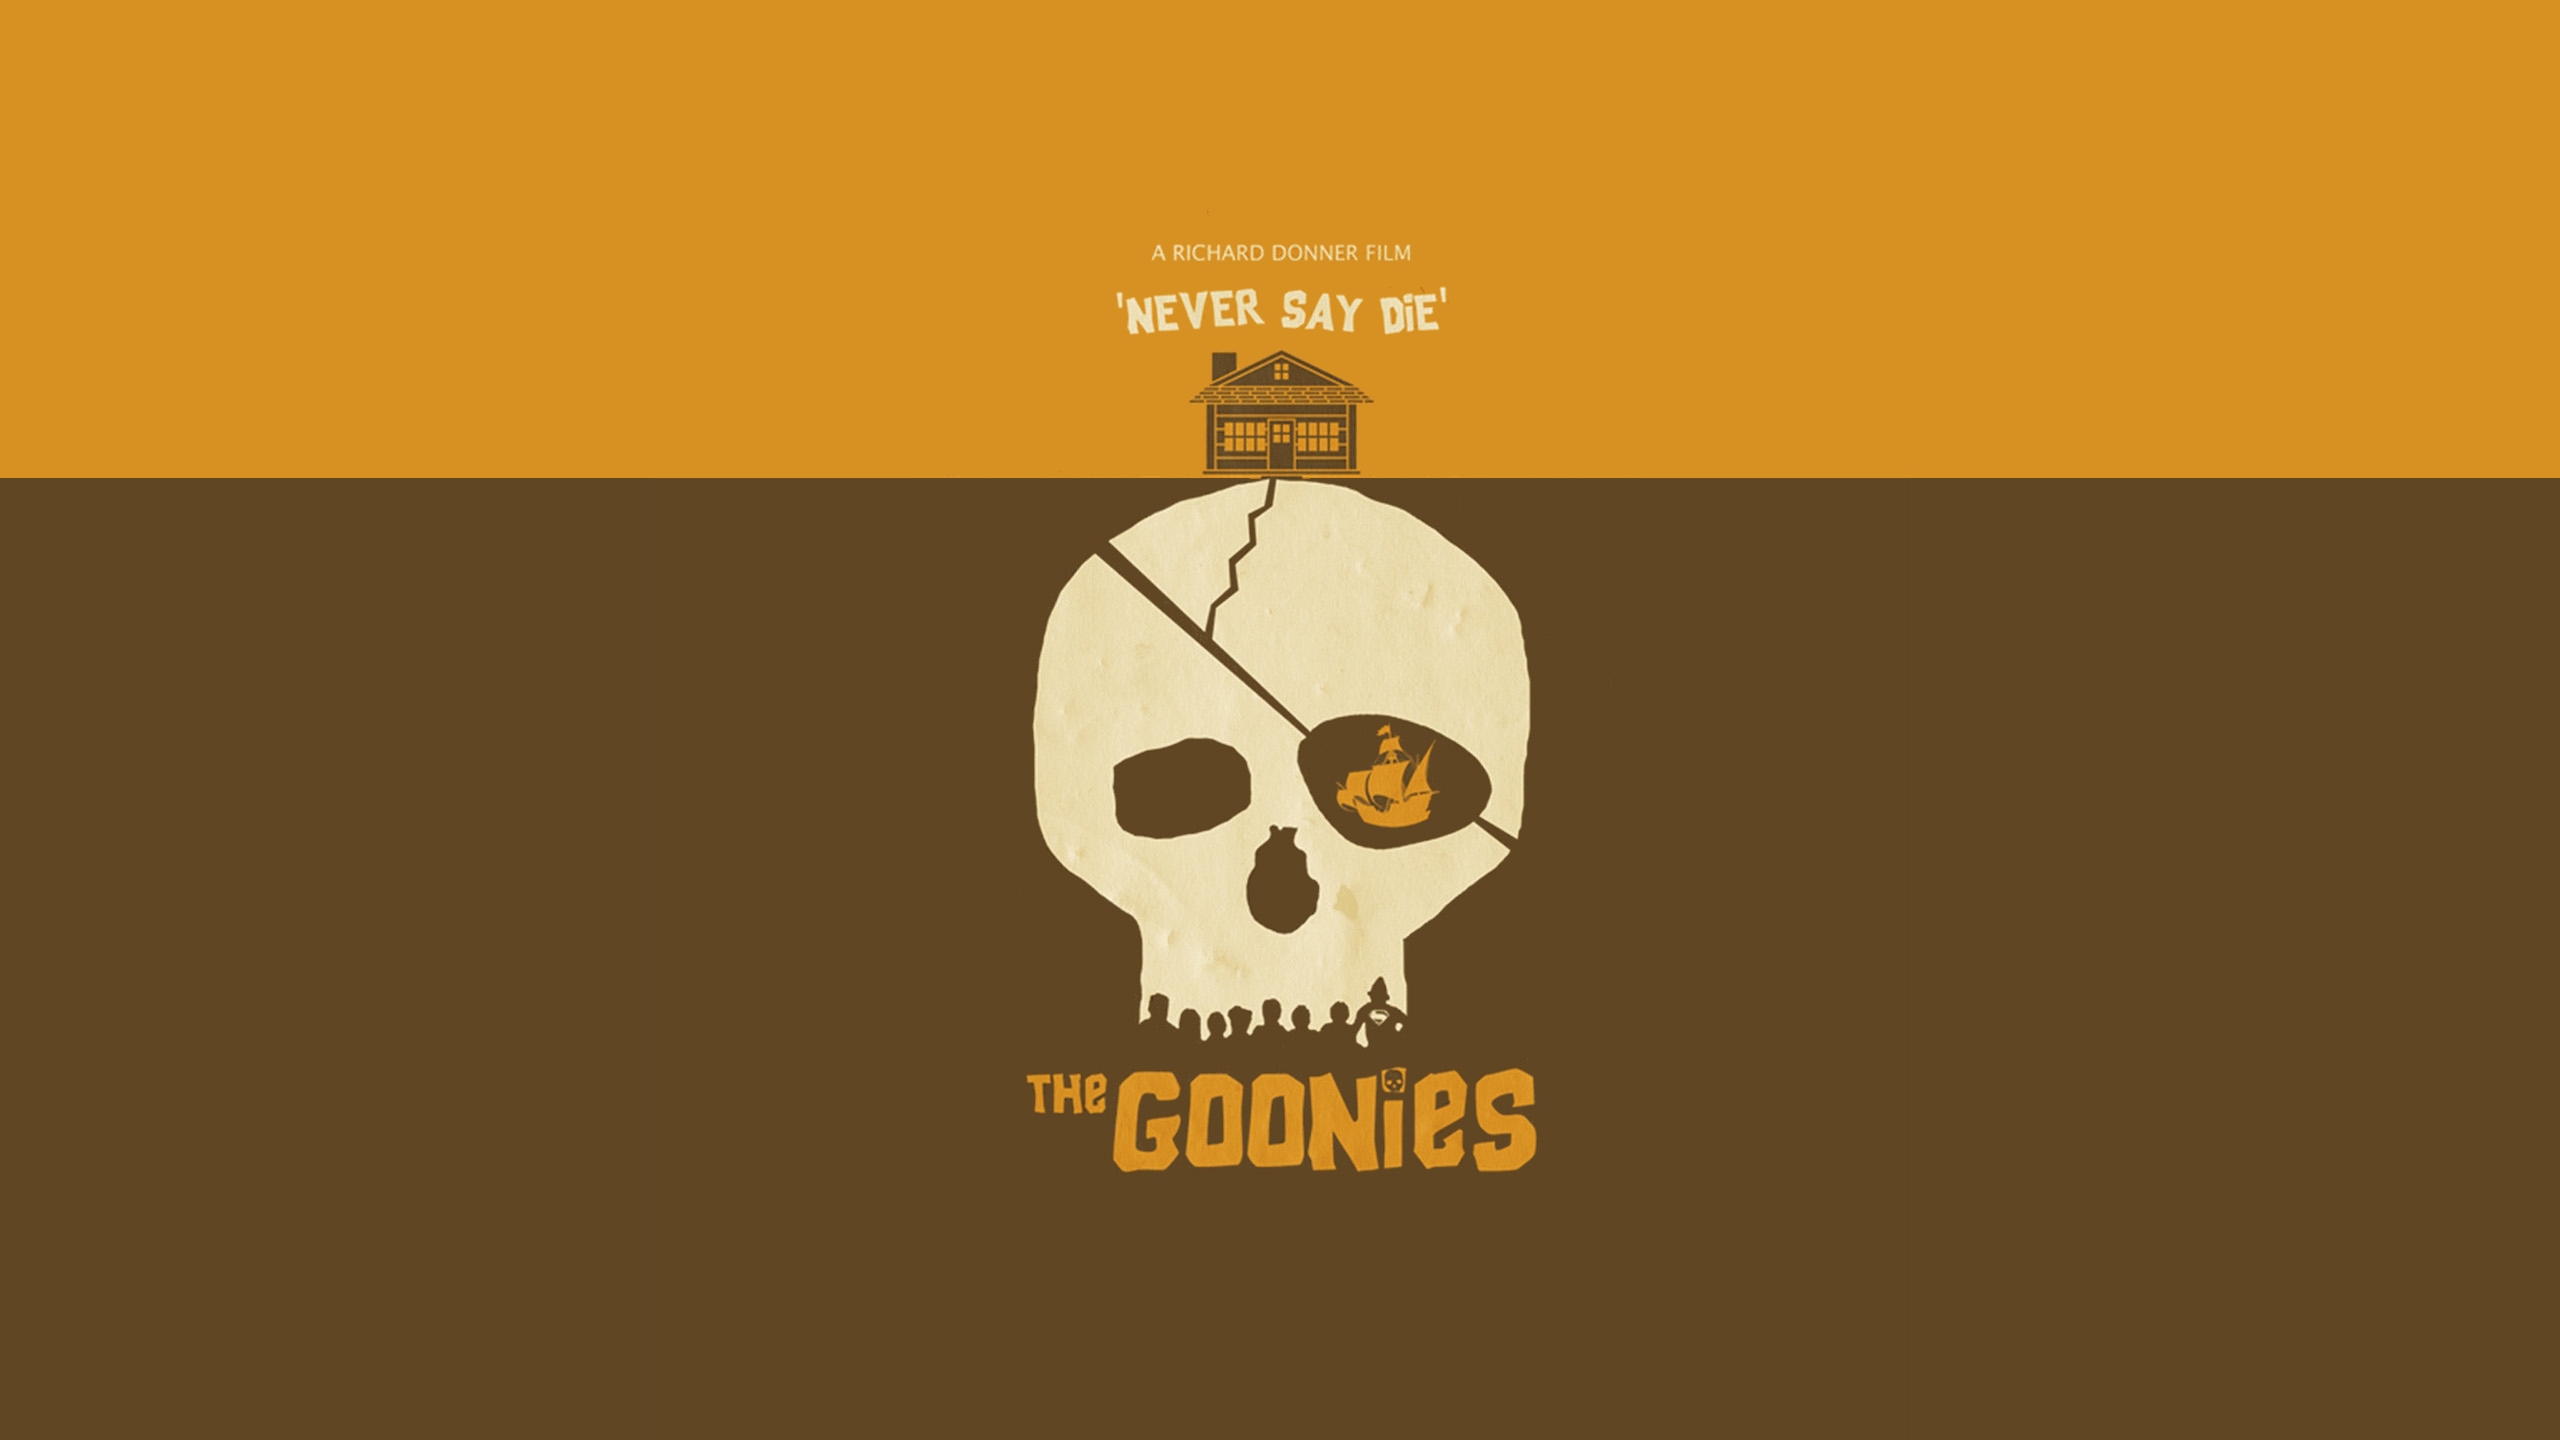 The Goonies Movie Poster Wallpaper Background